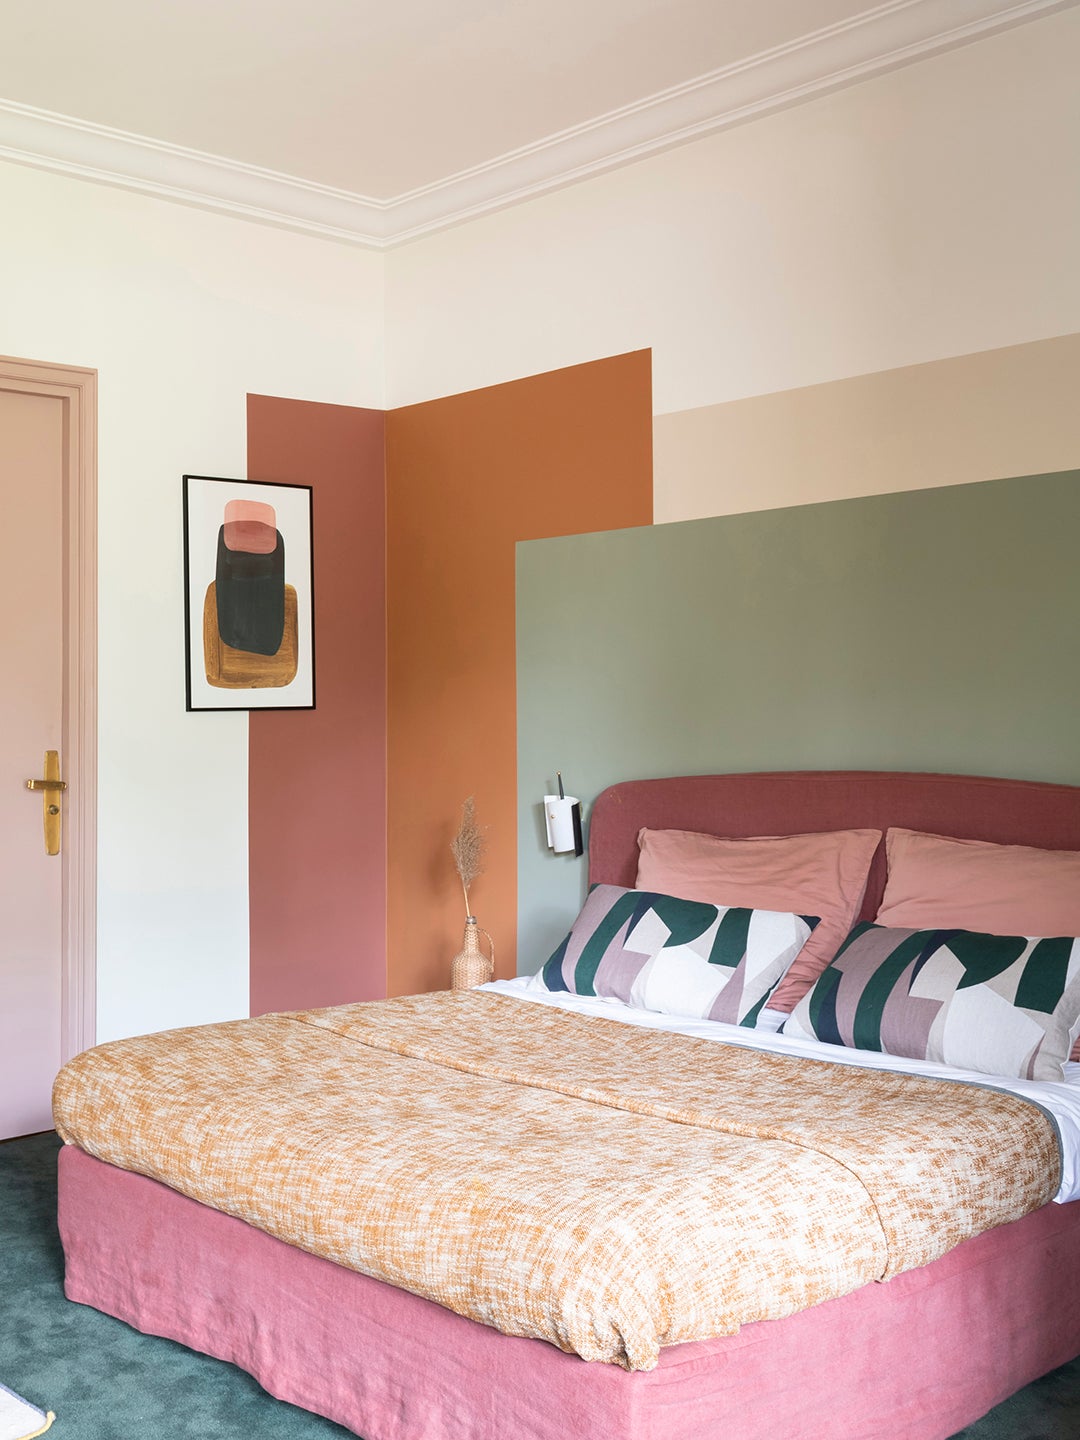 Bedroom with colorblocked wall in terracotta, sage, and beige. 